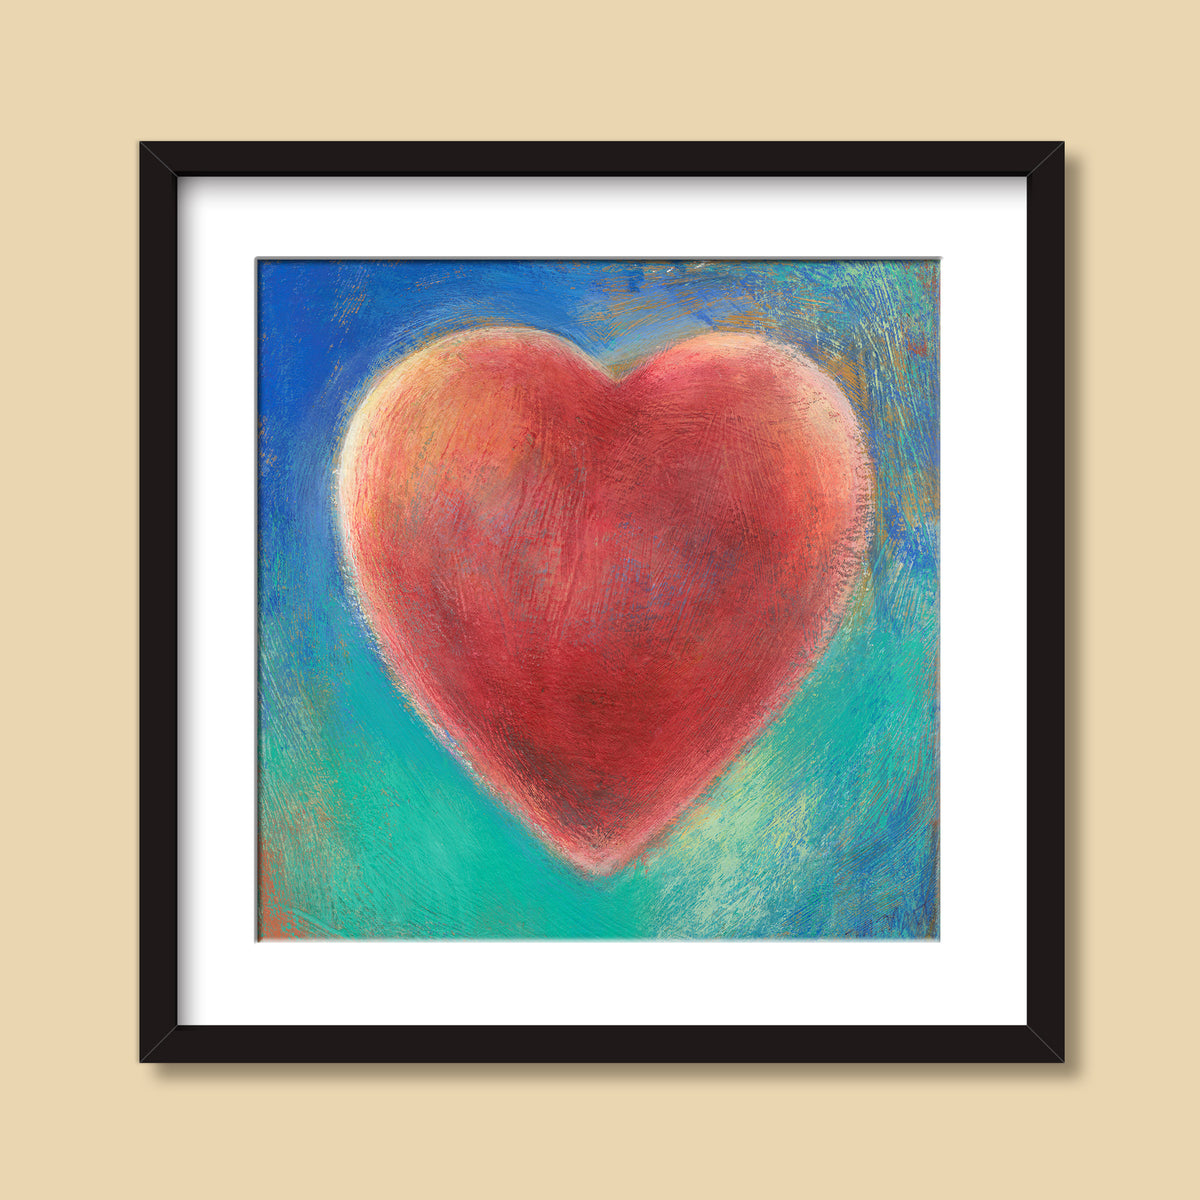 Wholehearted | gouache and pastel painting from the Heartworks Collection by Michelle Marta-Drake.